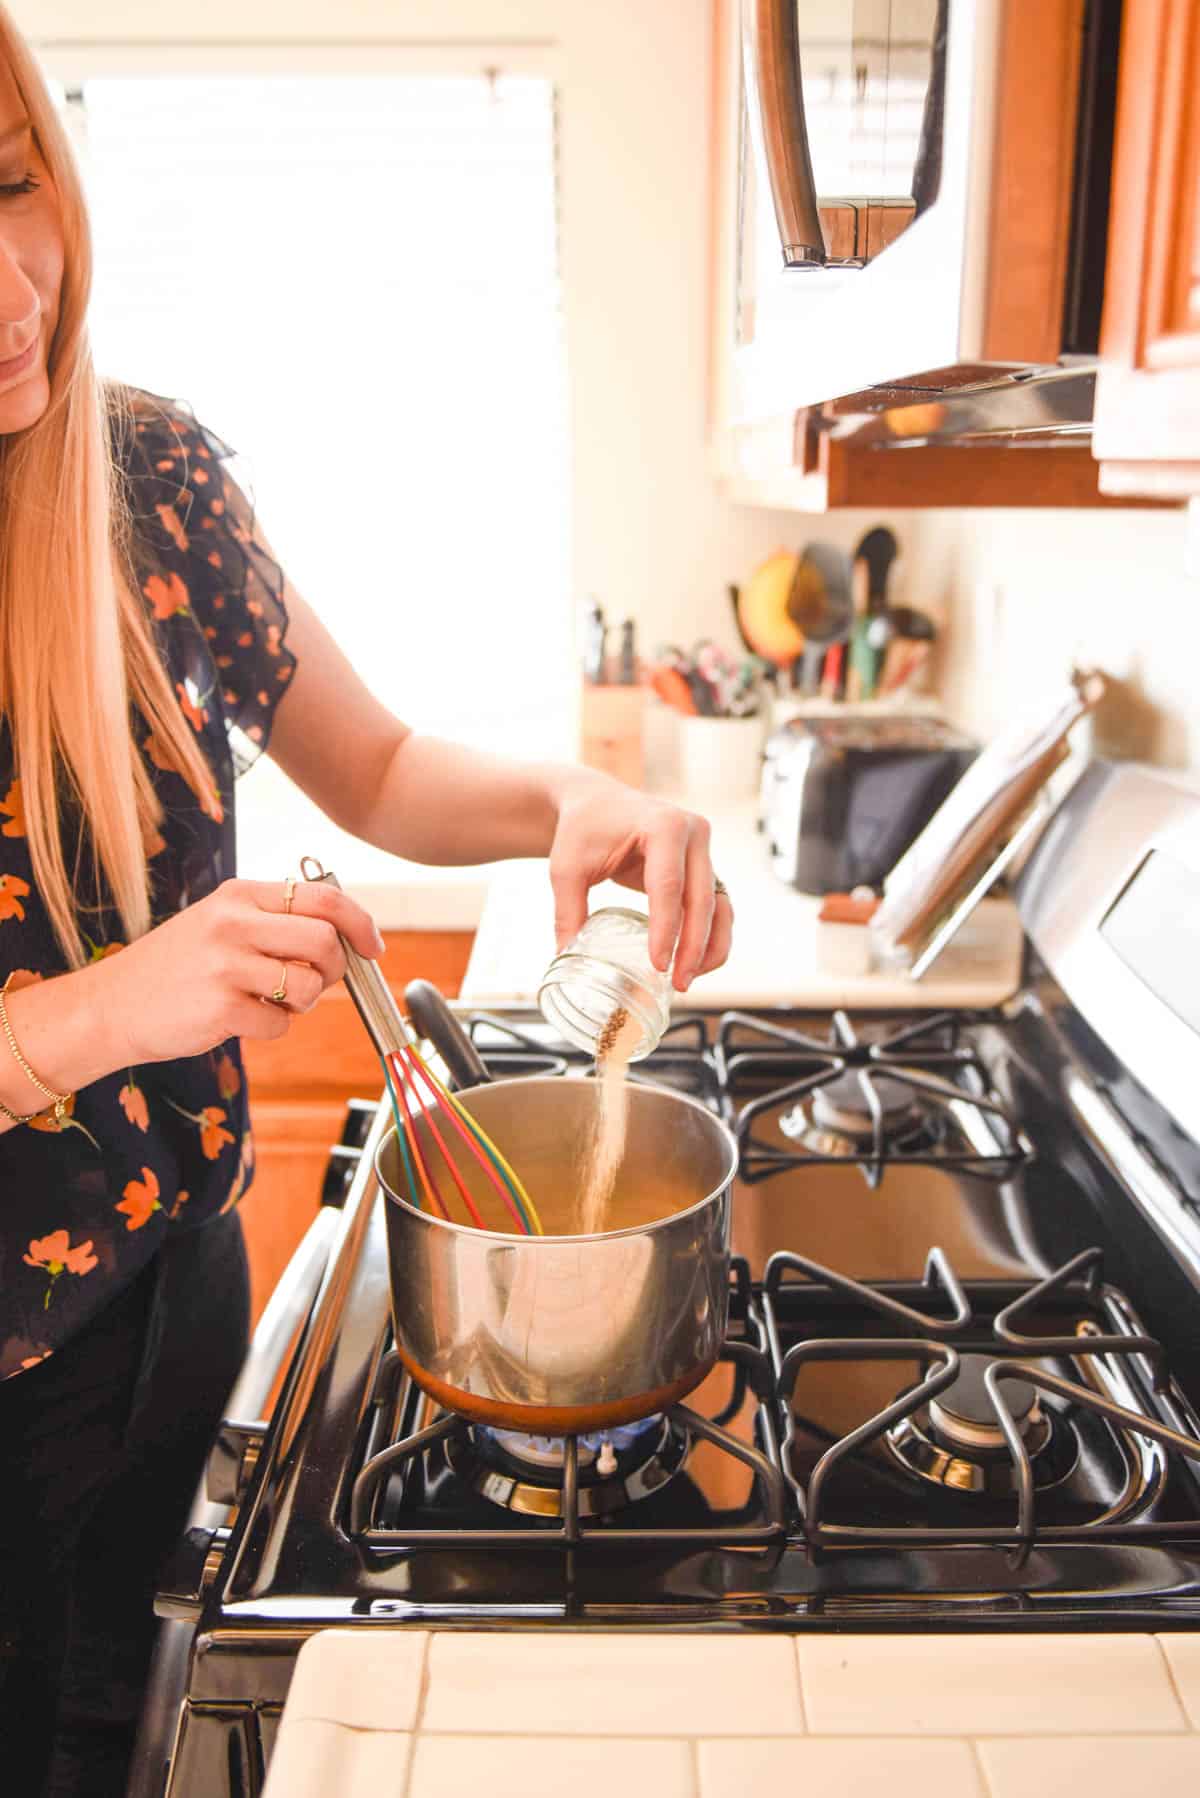 Woman adding spices to a saucepan on the stove.